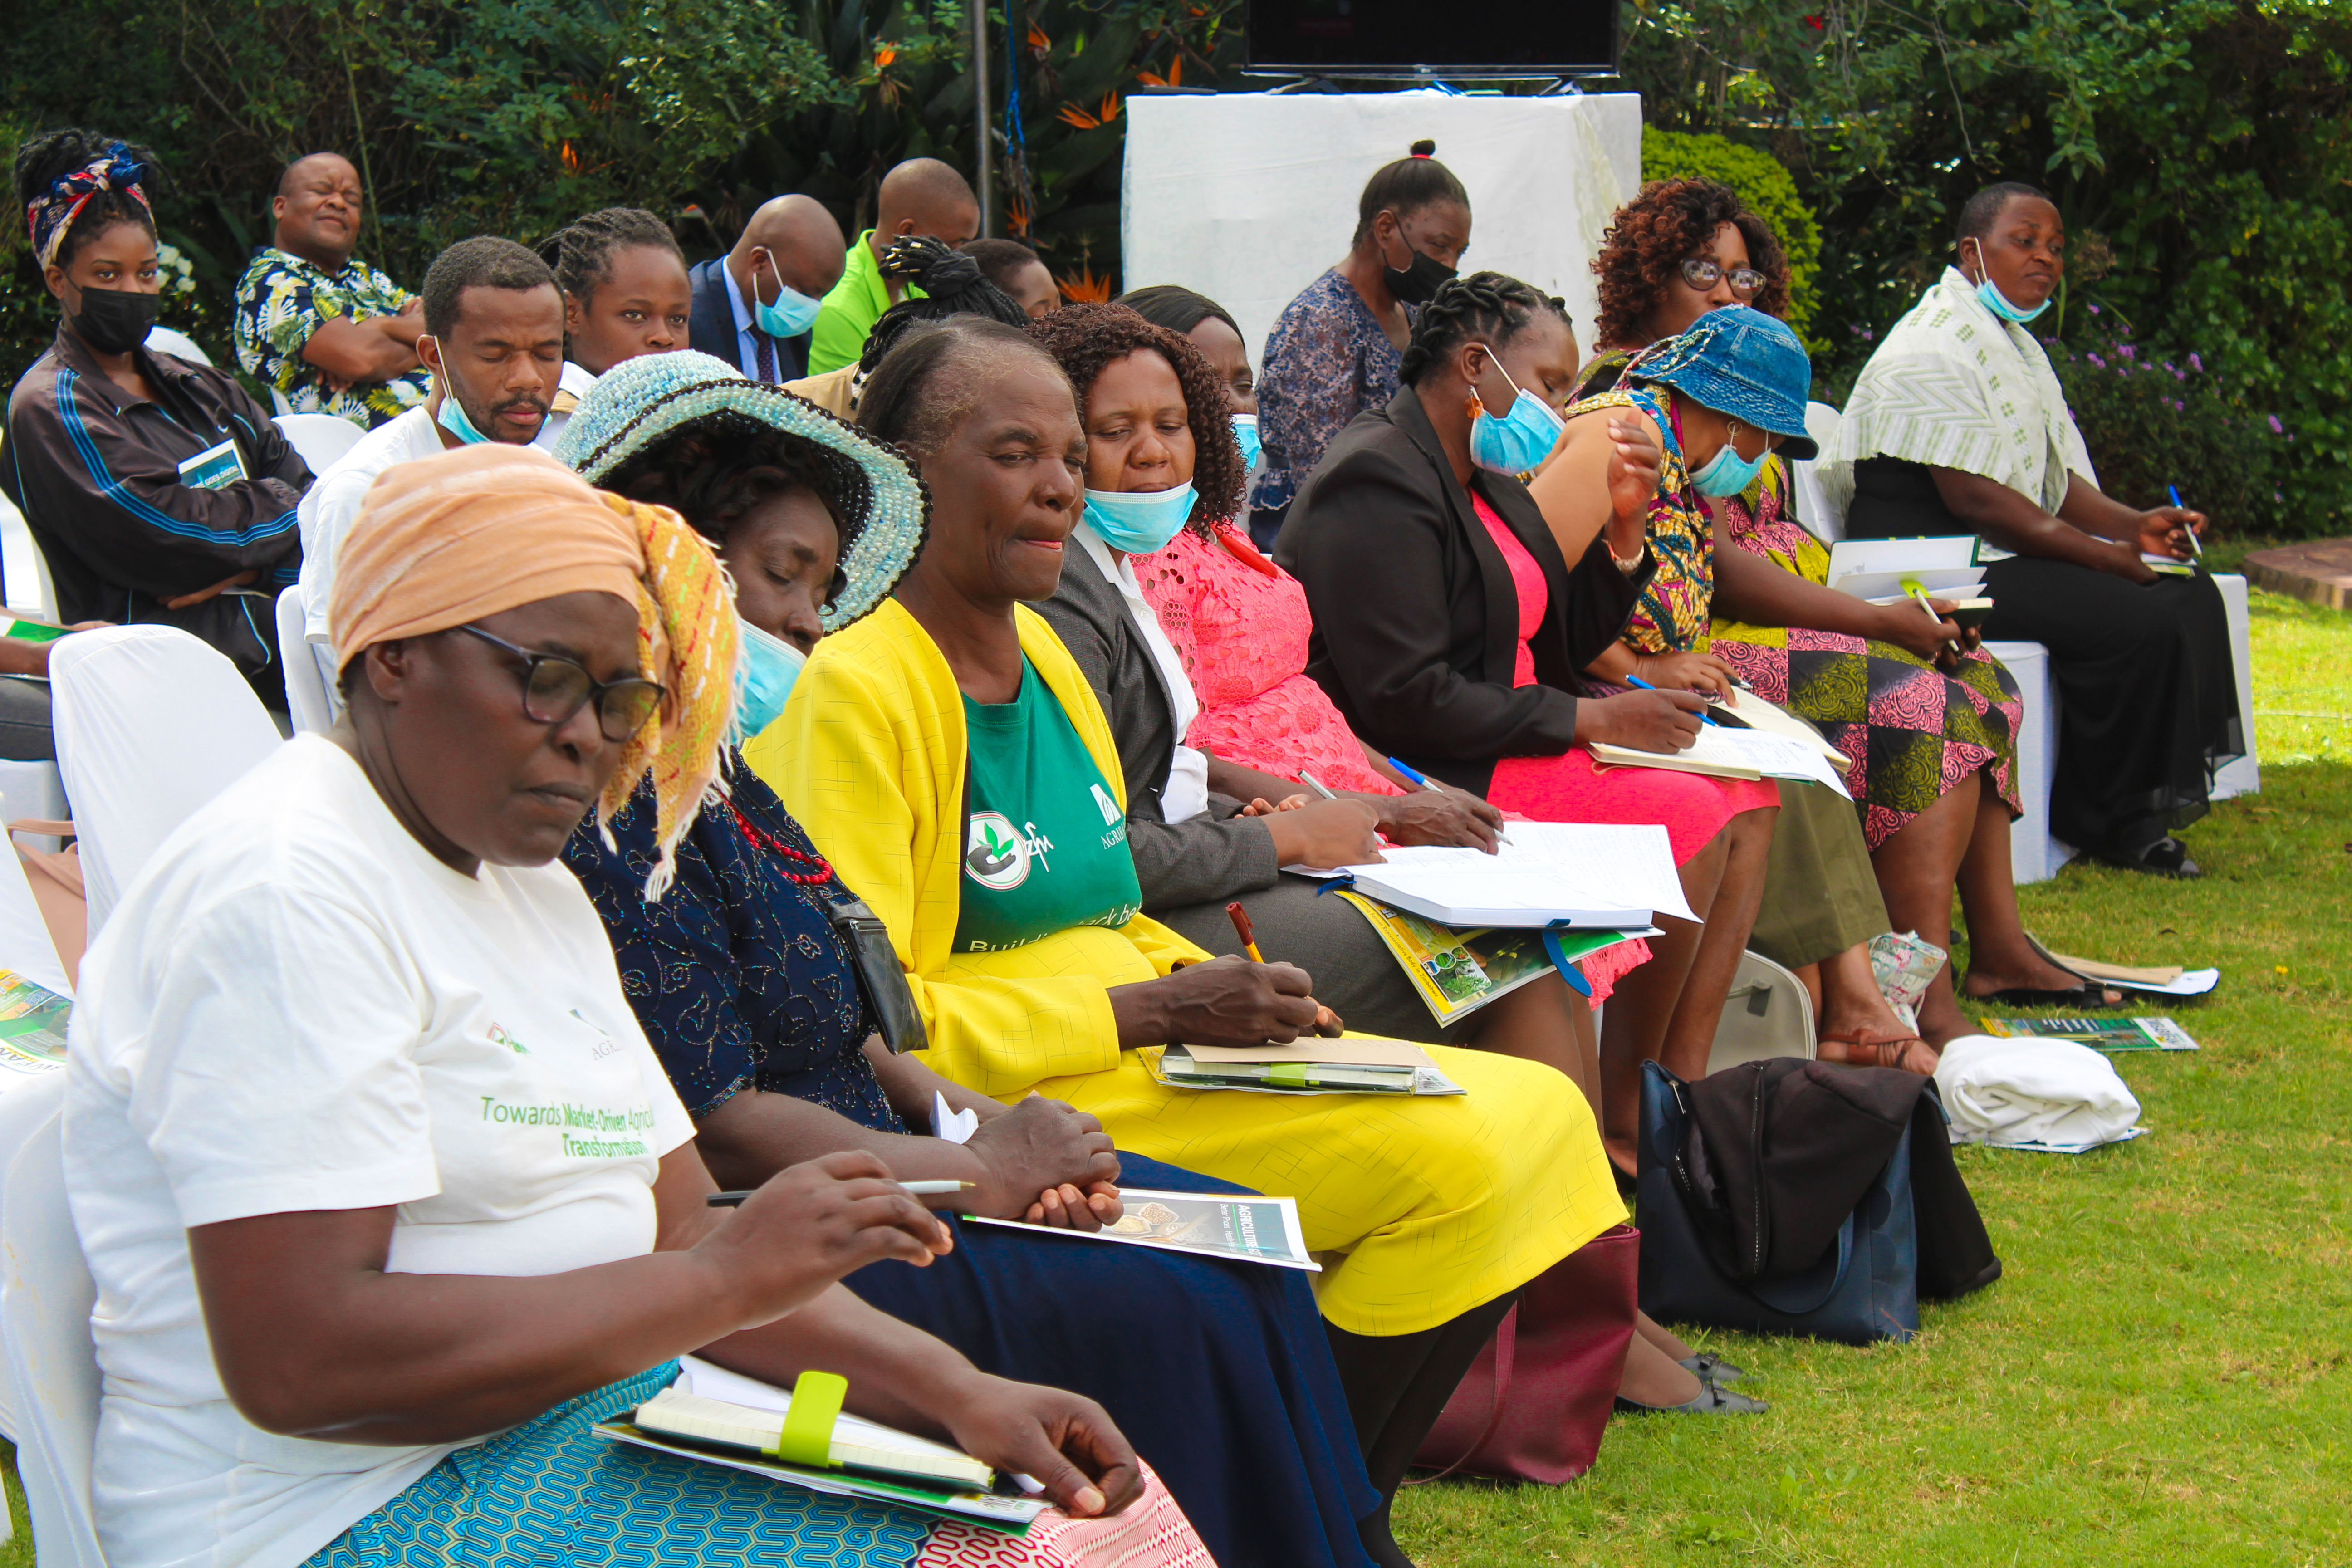 On the 10th of May 2022, Zimbabwe Farmers’ Union hosted the inaugural Women in Agribusiness Forum which brought together women entrepreneurs from the different agricultural value chains, policy makers, business leaders, and financial institutions.